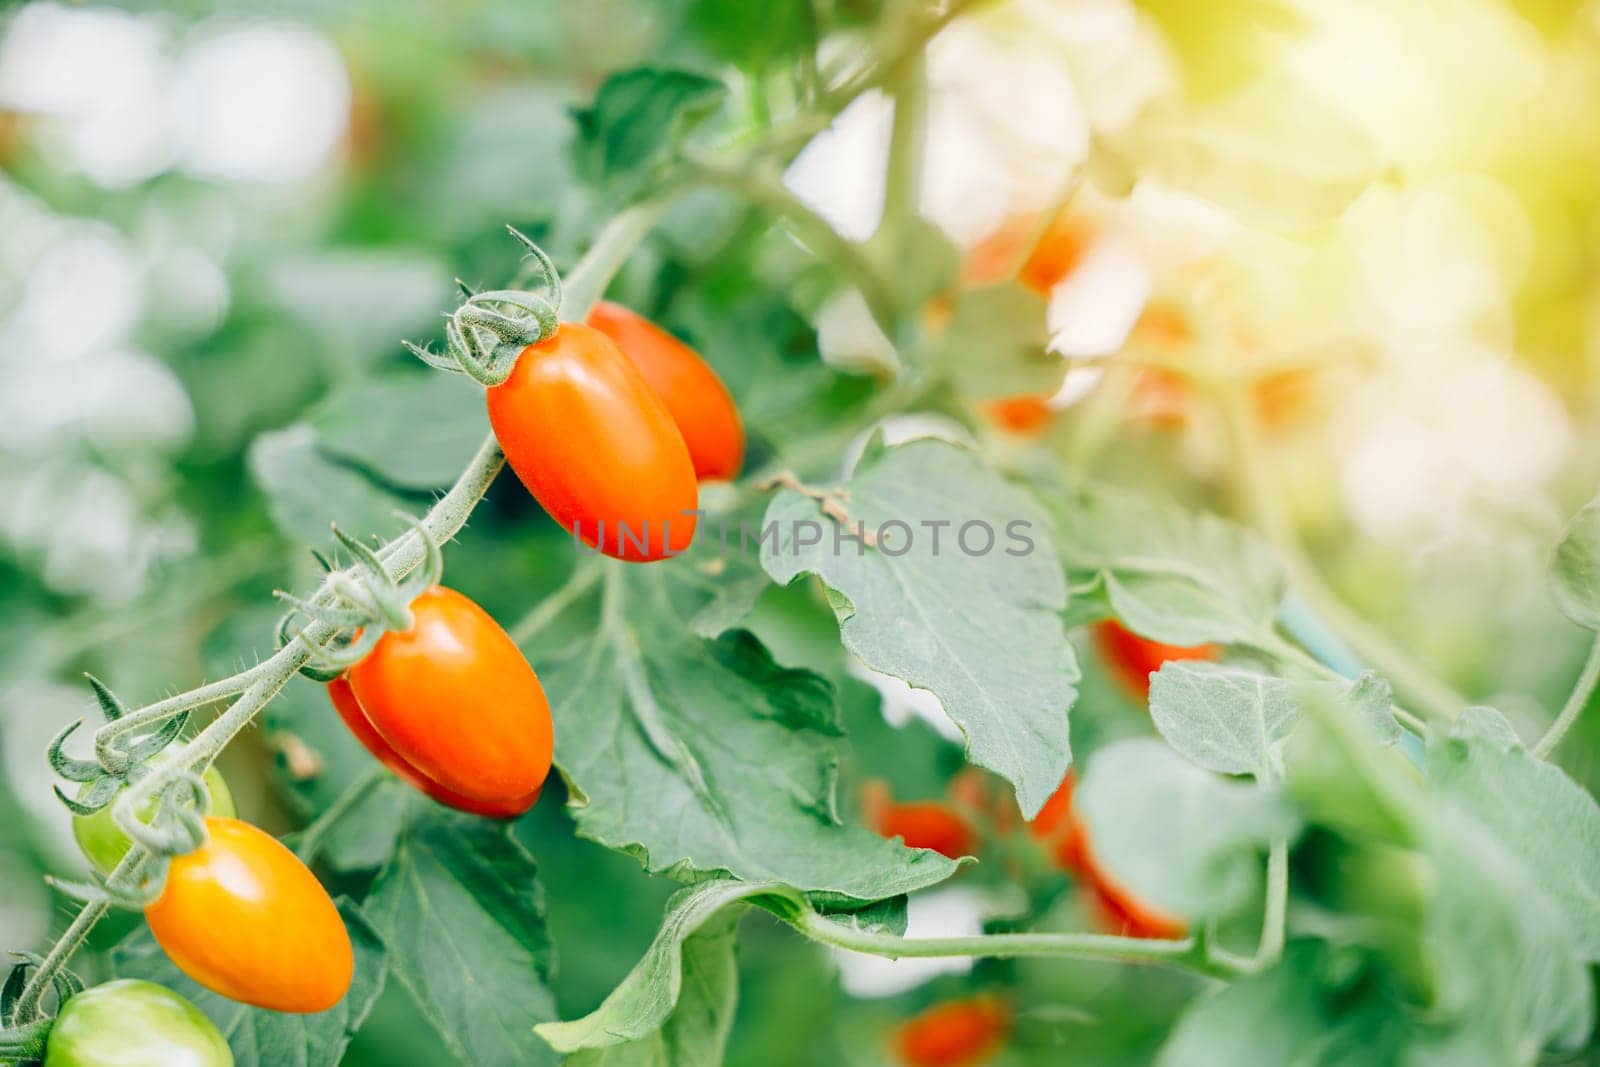 Vibrant tomatoes on a branch in the greenhouse by Sorapop